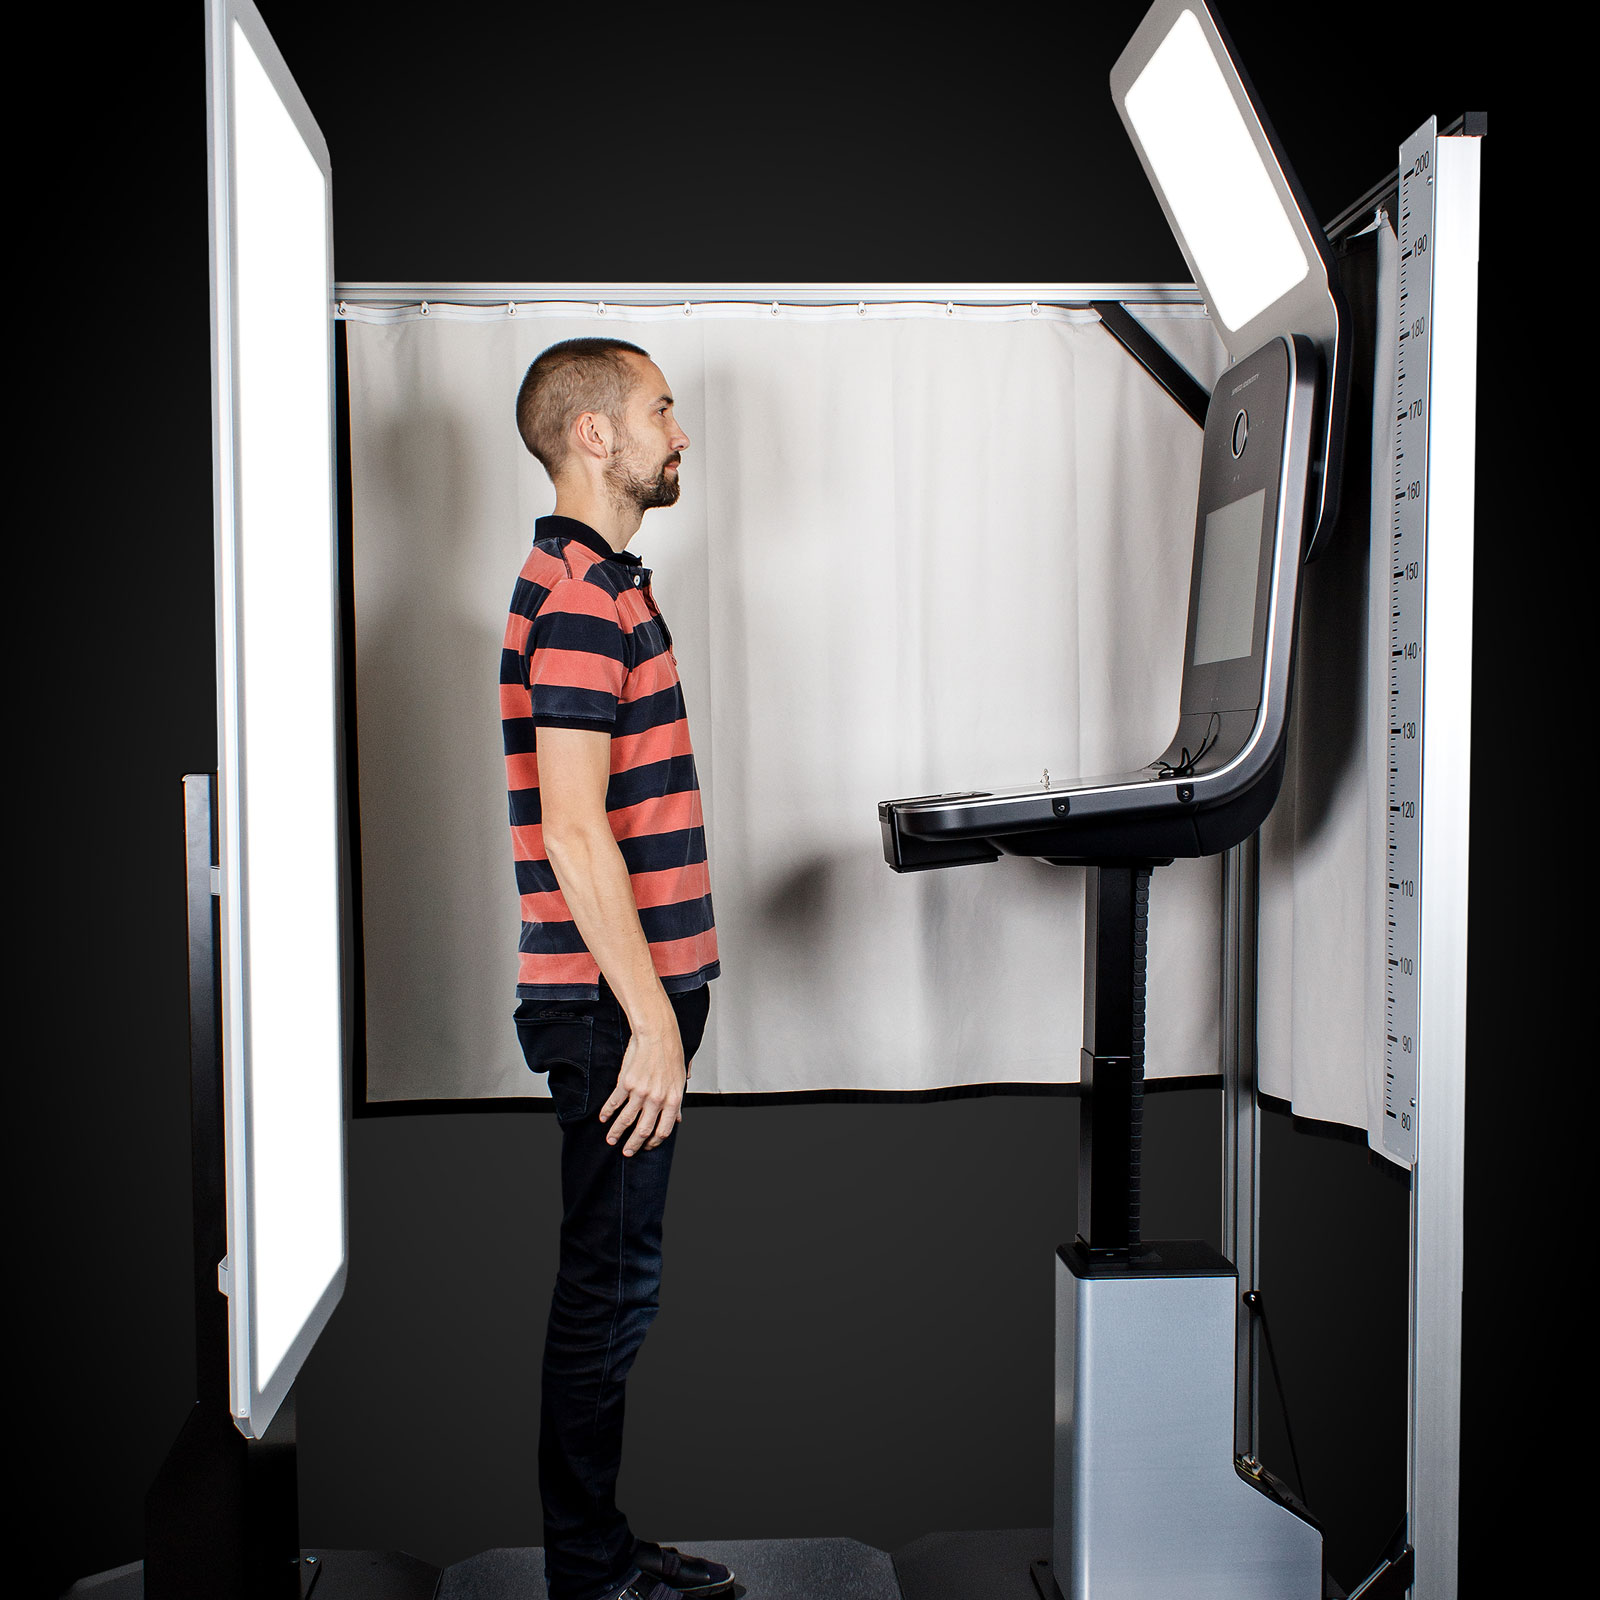 A man standing in a photo kiosk